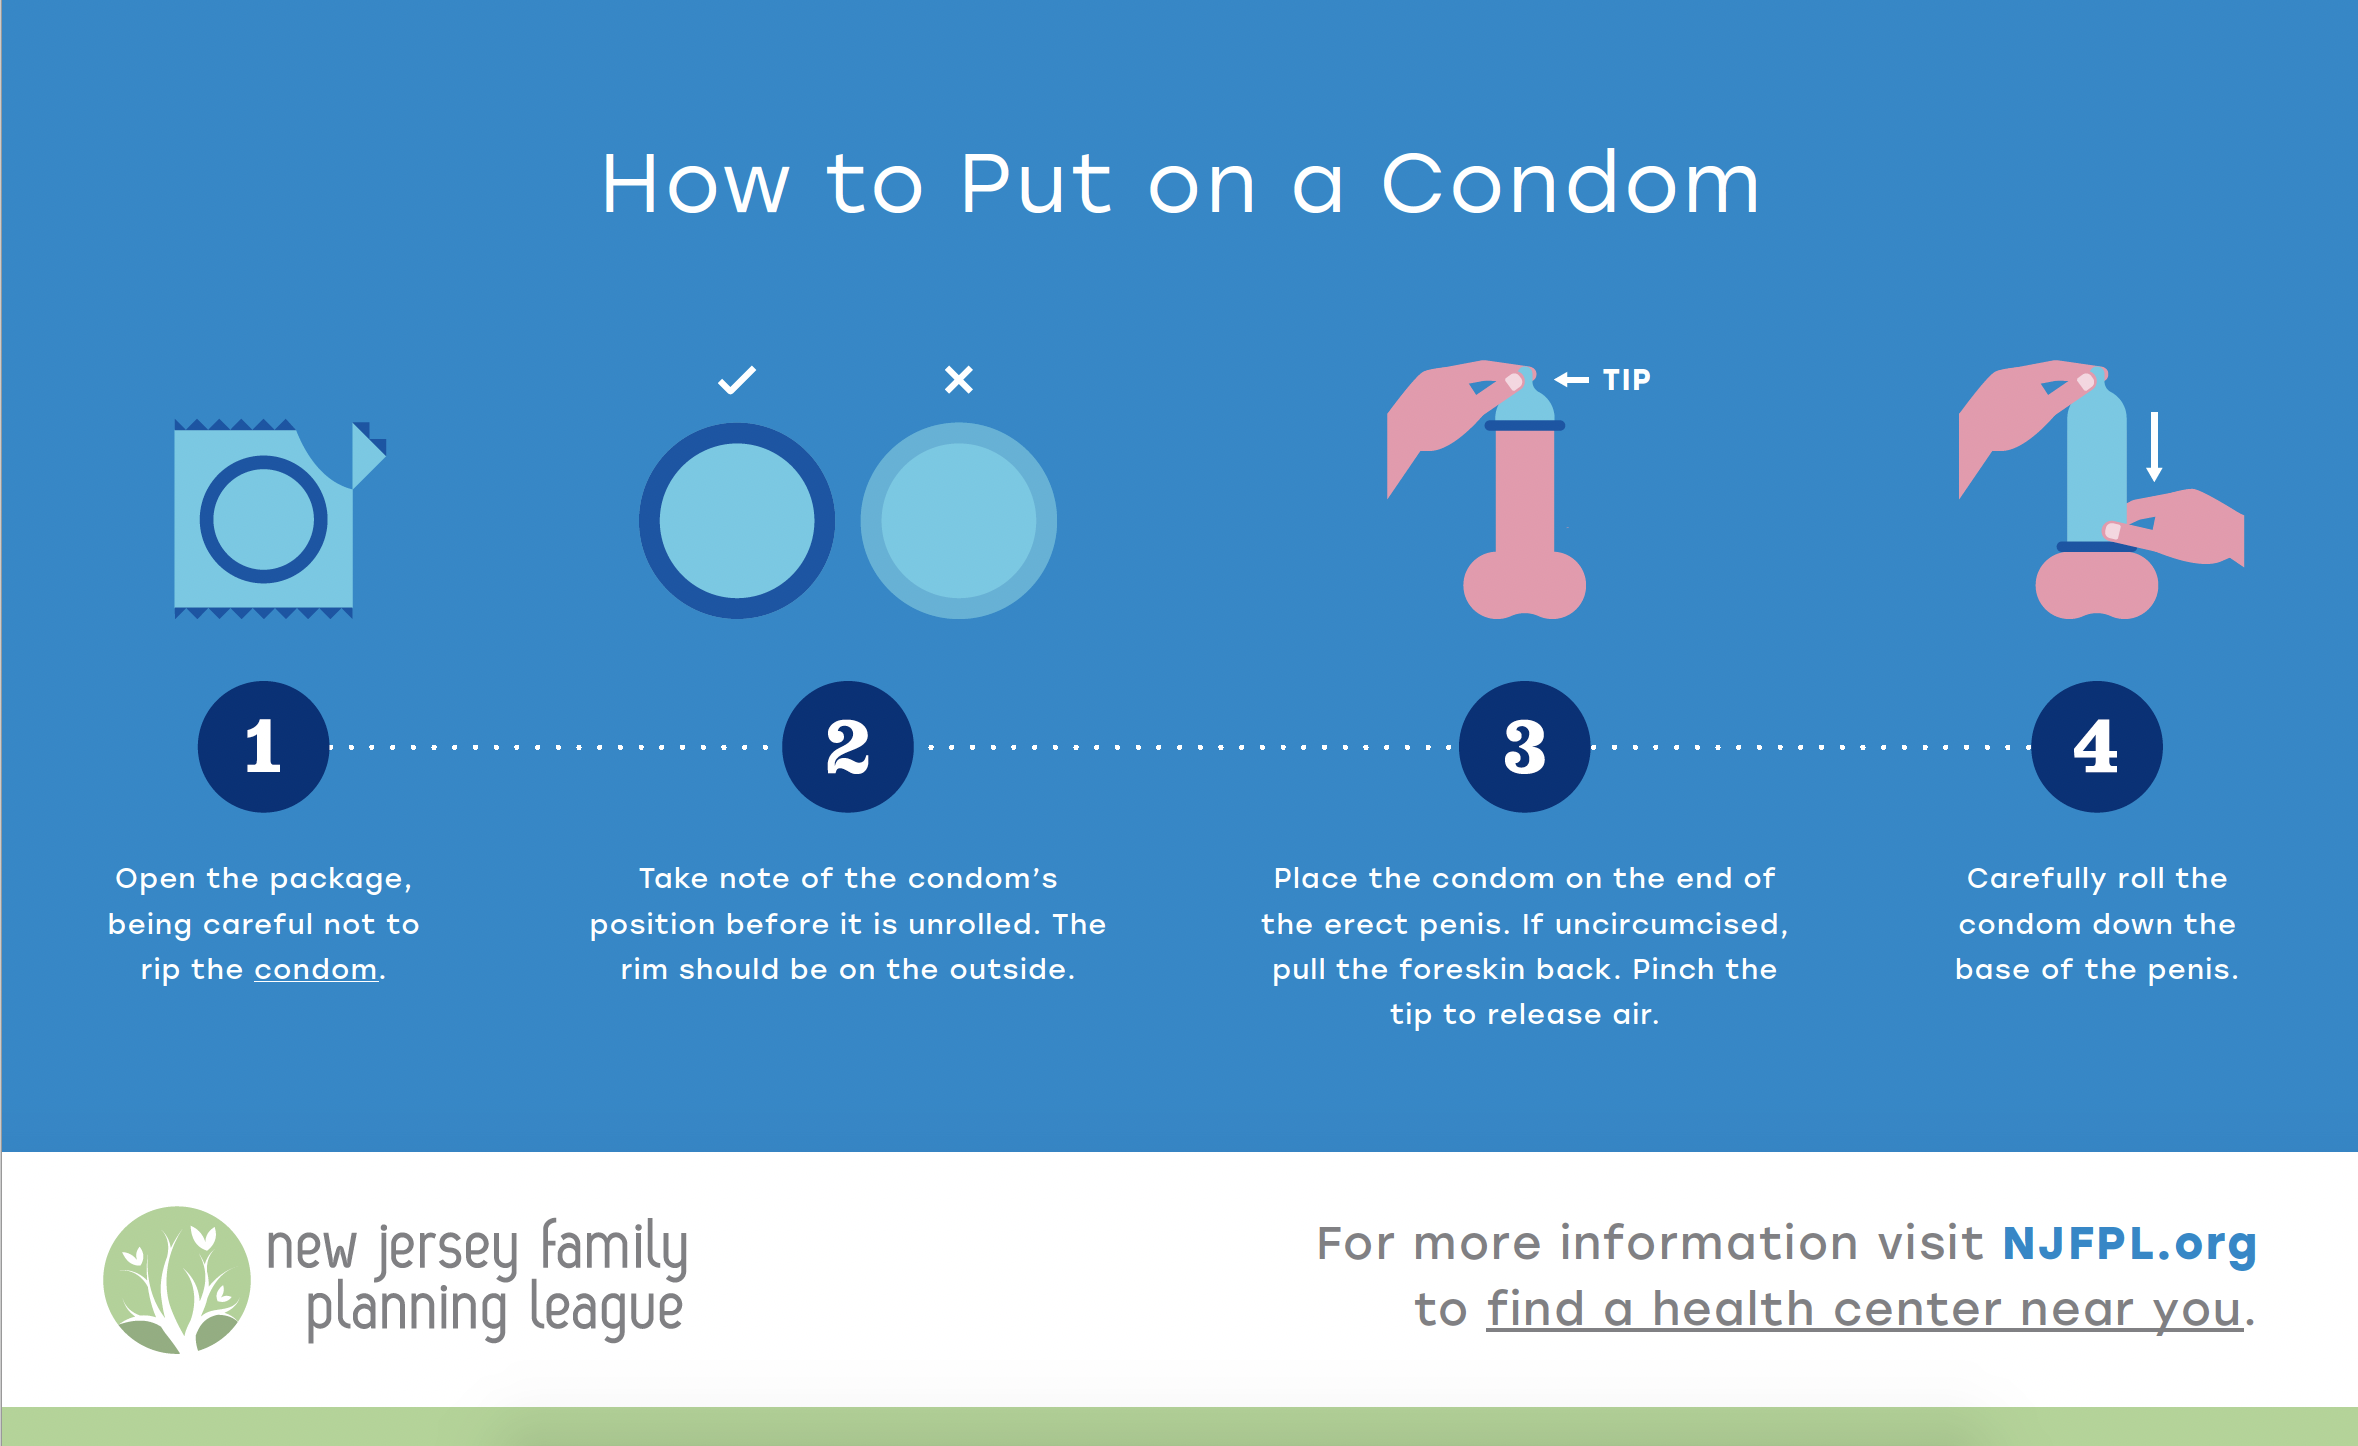 How to put on a Condom